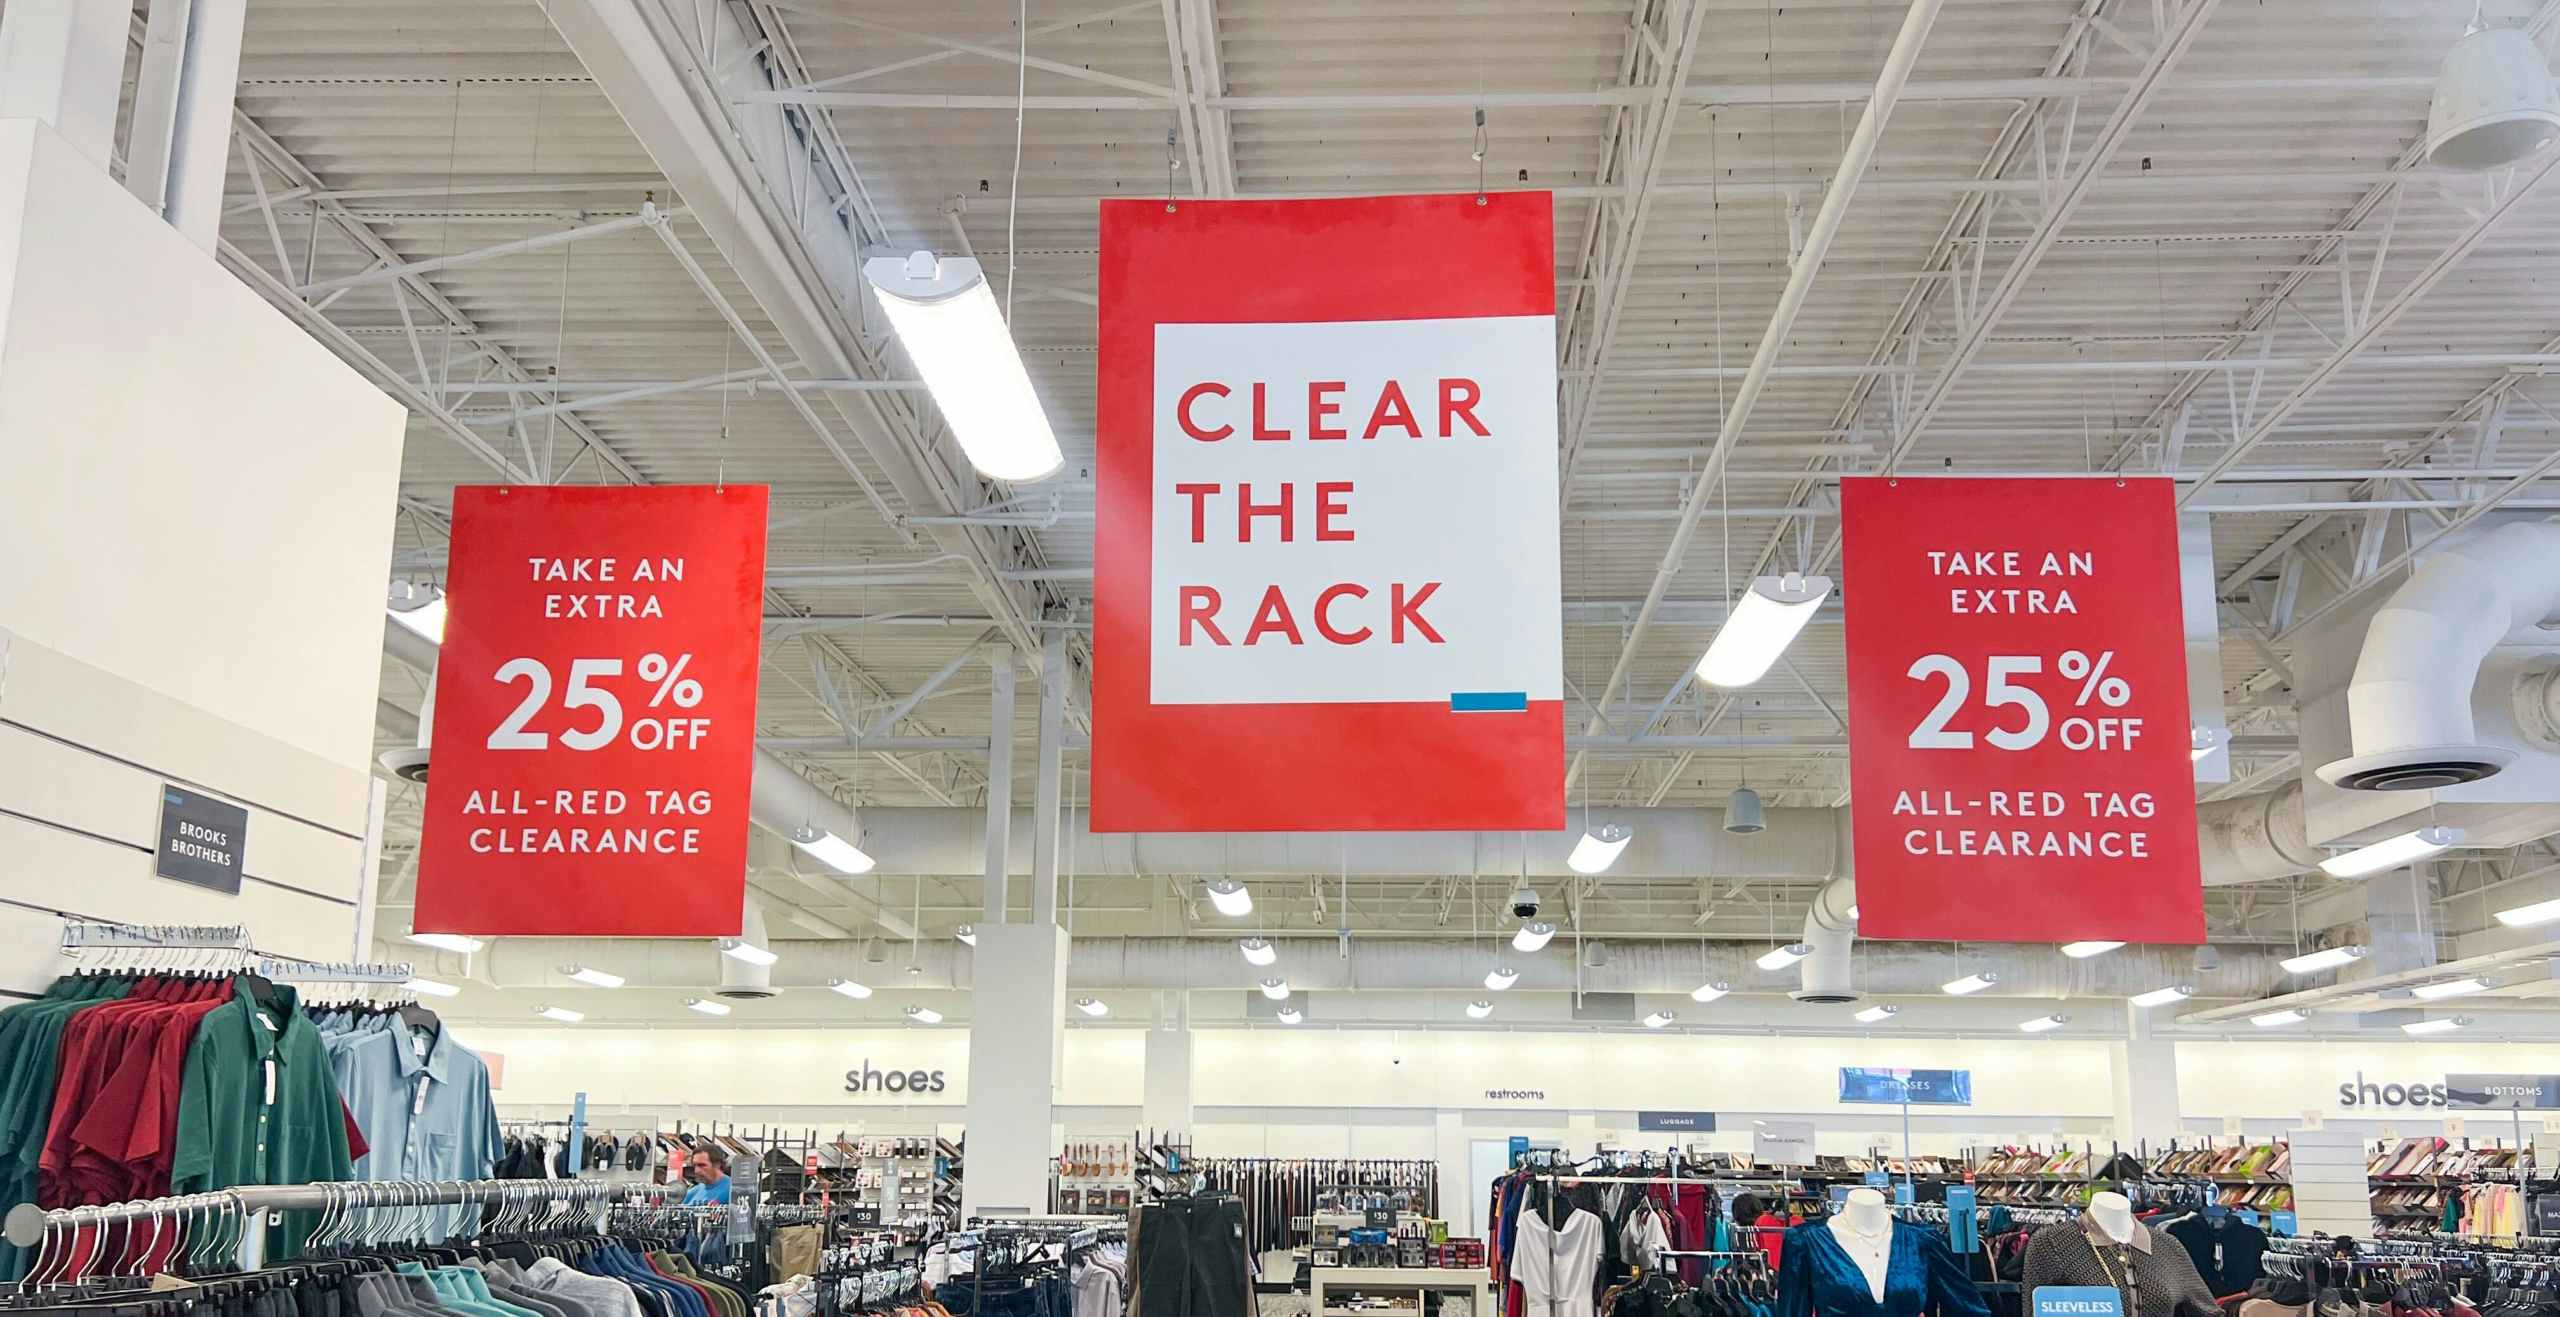 nordstrom rack with signs about the clear the rack event